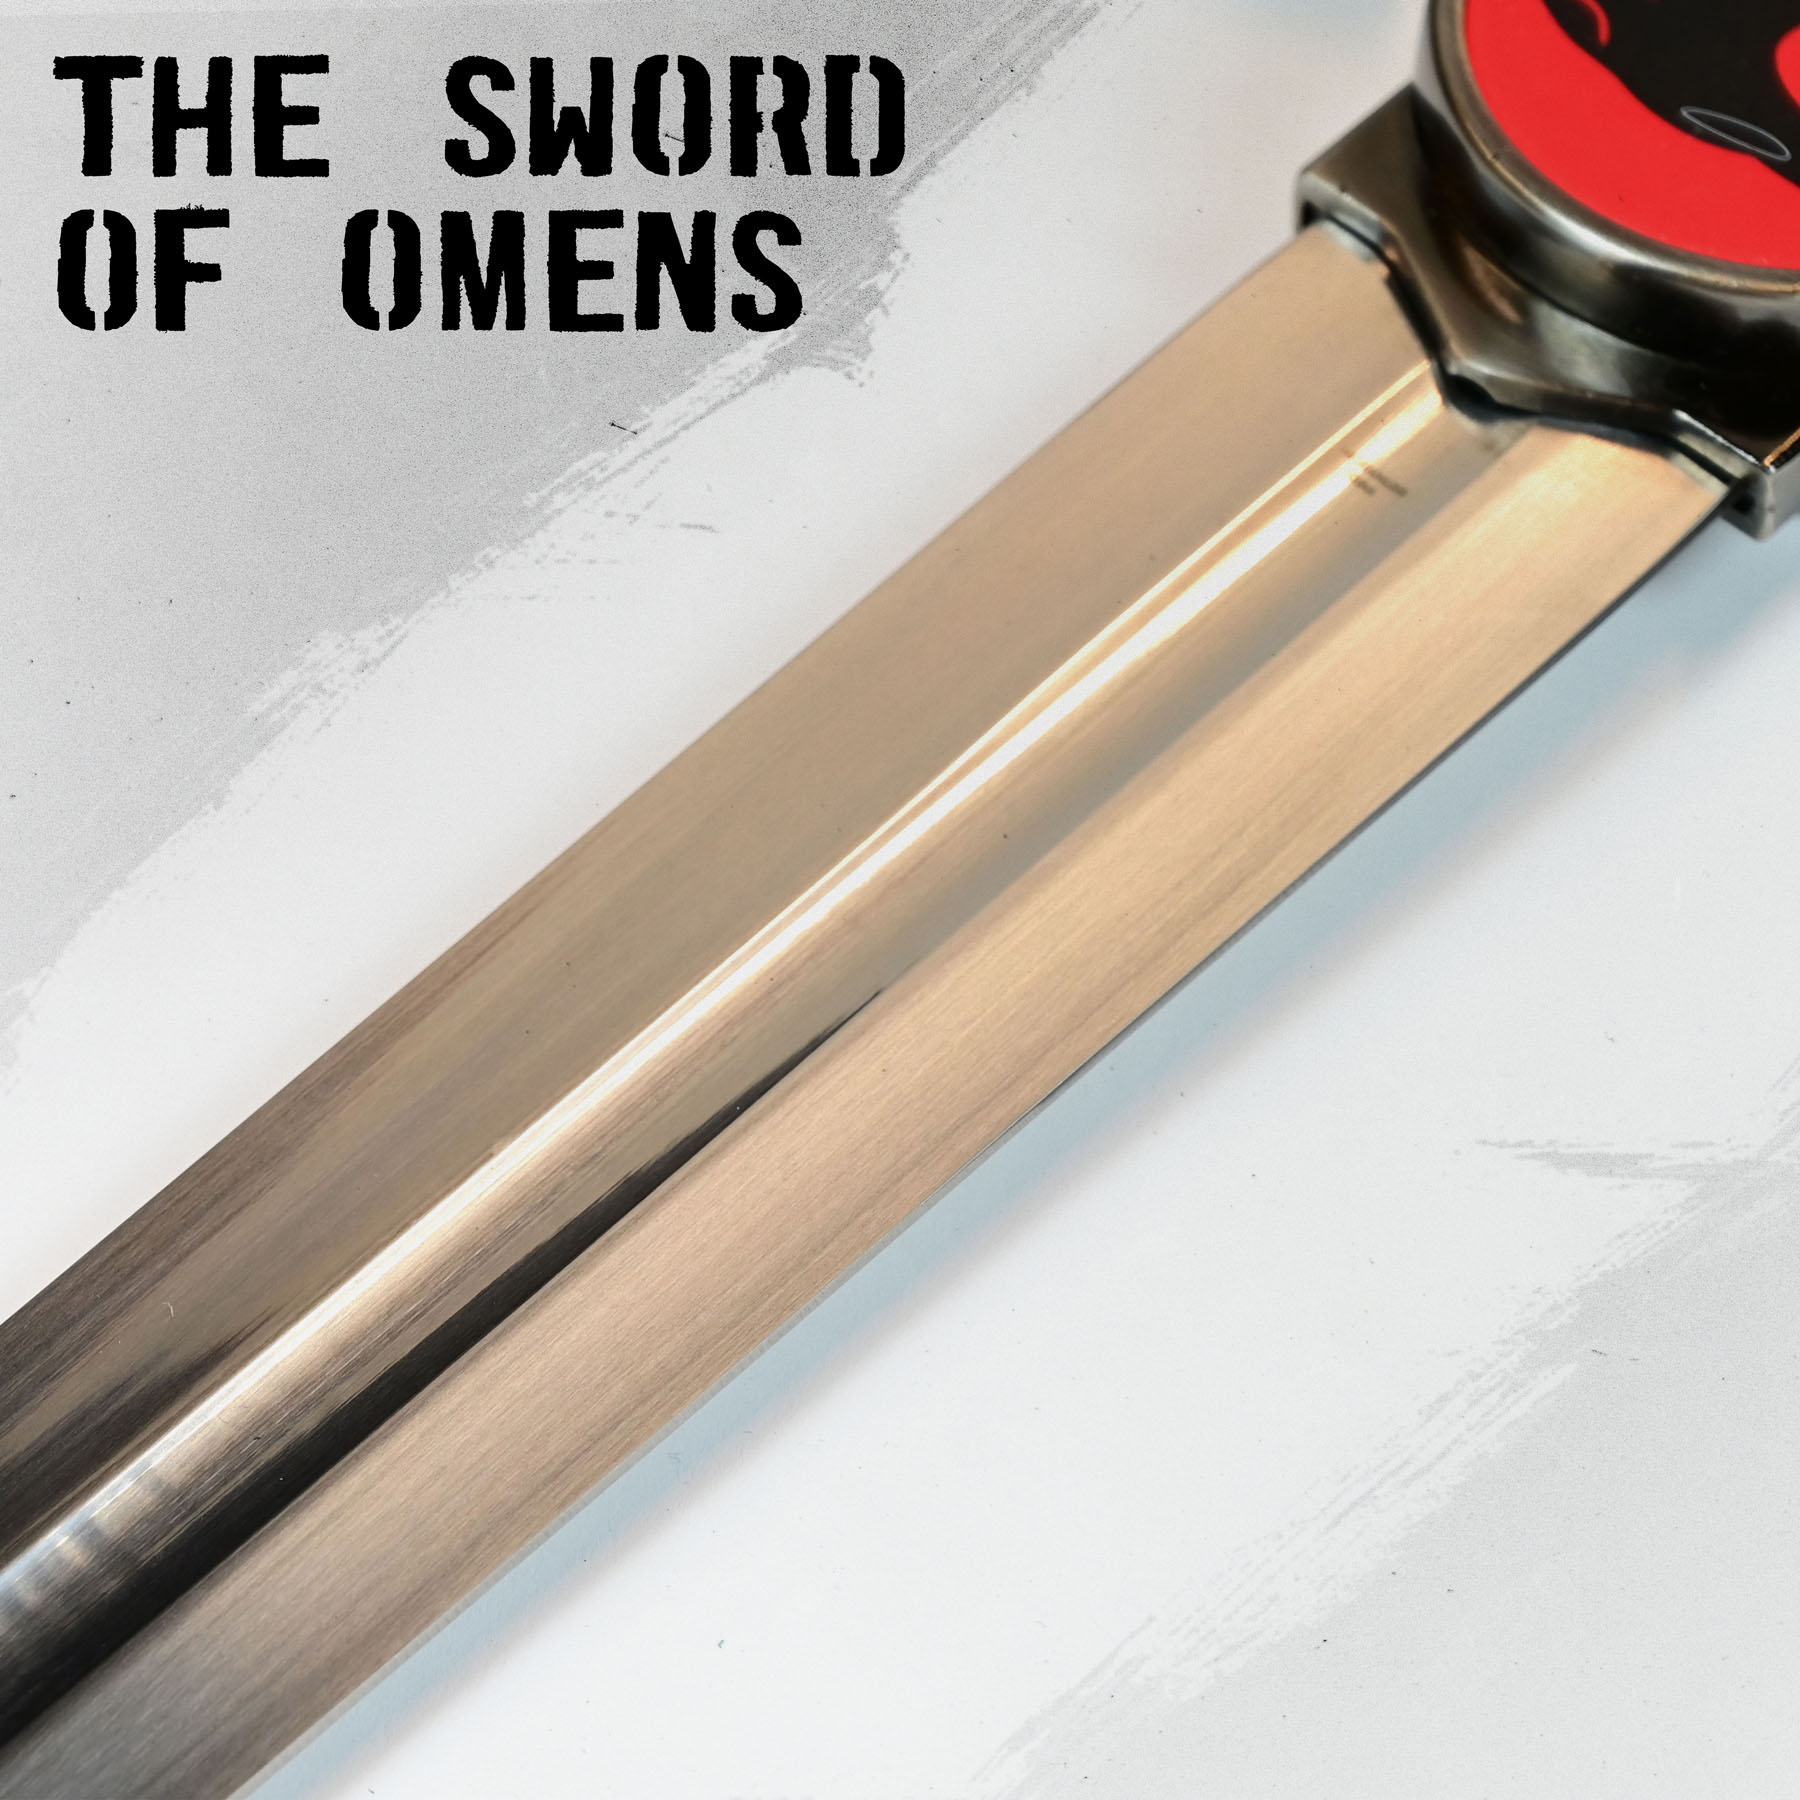 ThunderCats - The Sword of the Omens with sheath